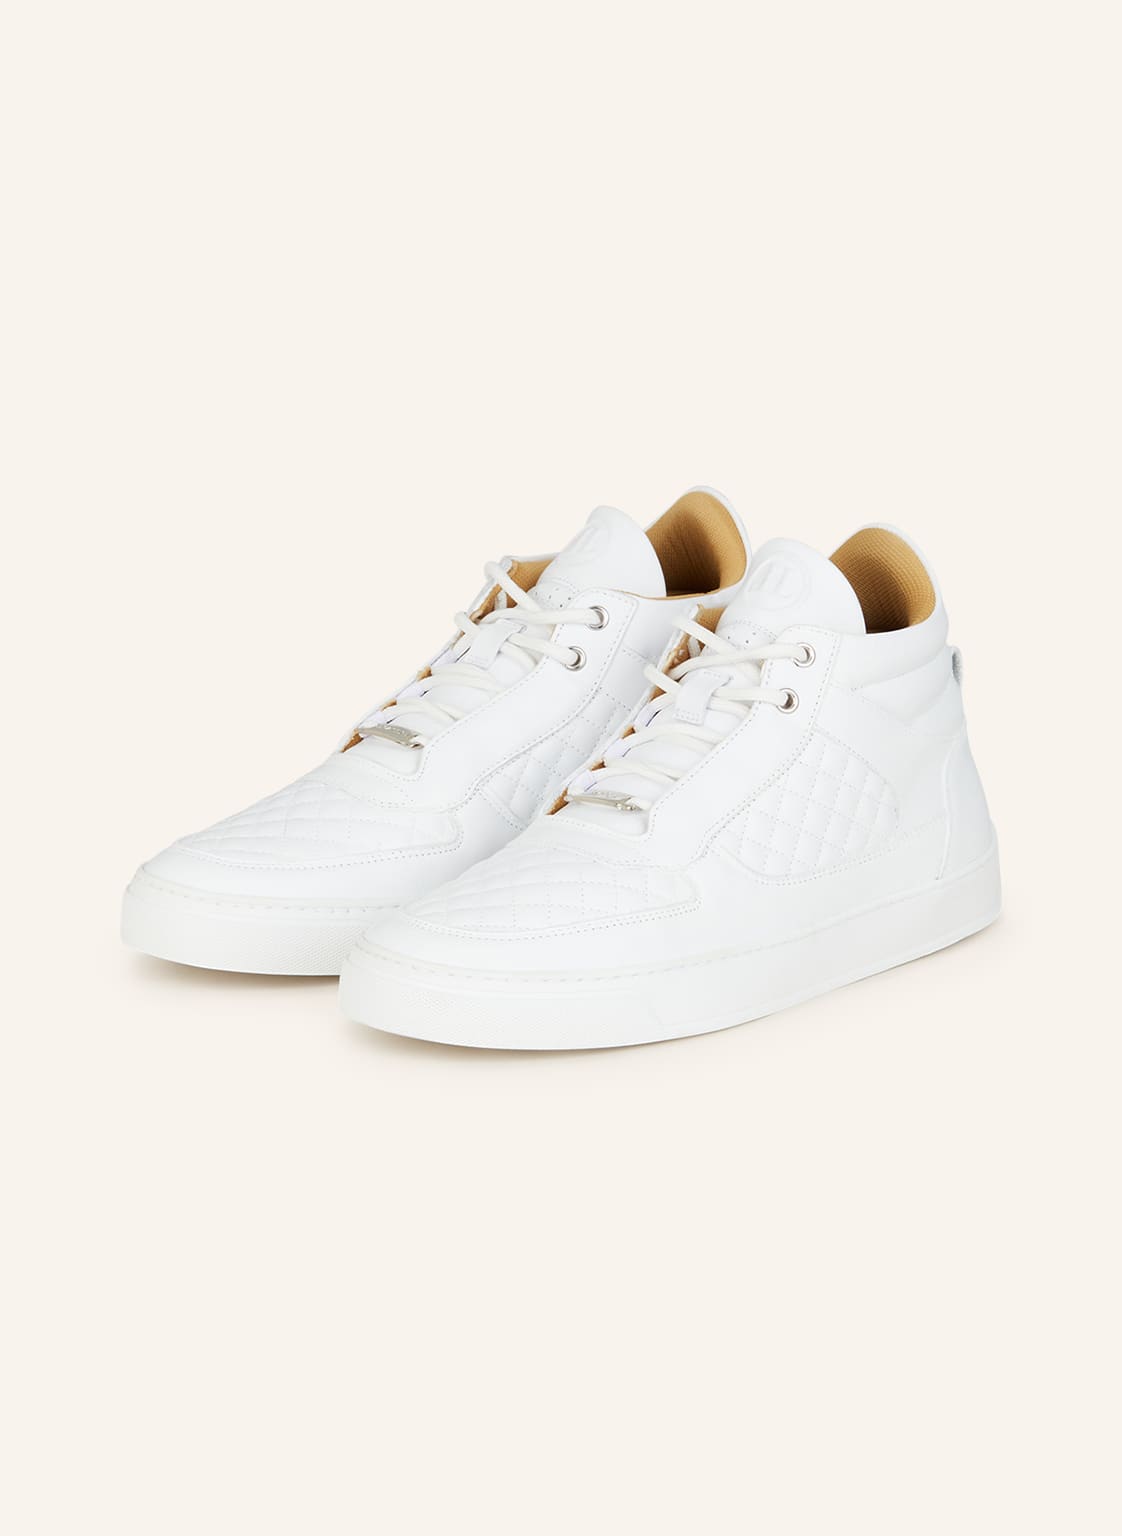 Leandro Lopes Hightop-Sneaker Faisca weiss von LEANDRO LOPES